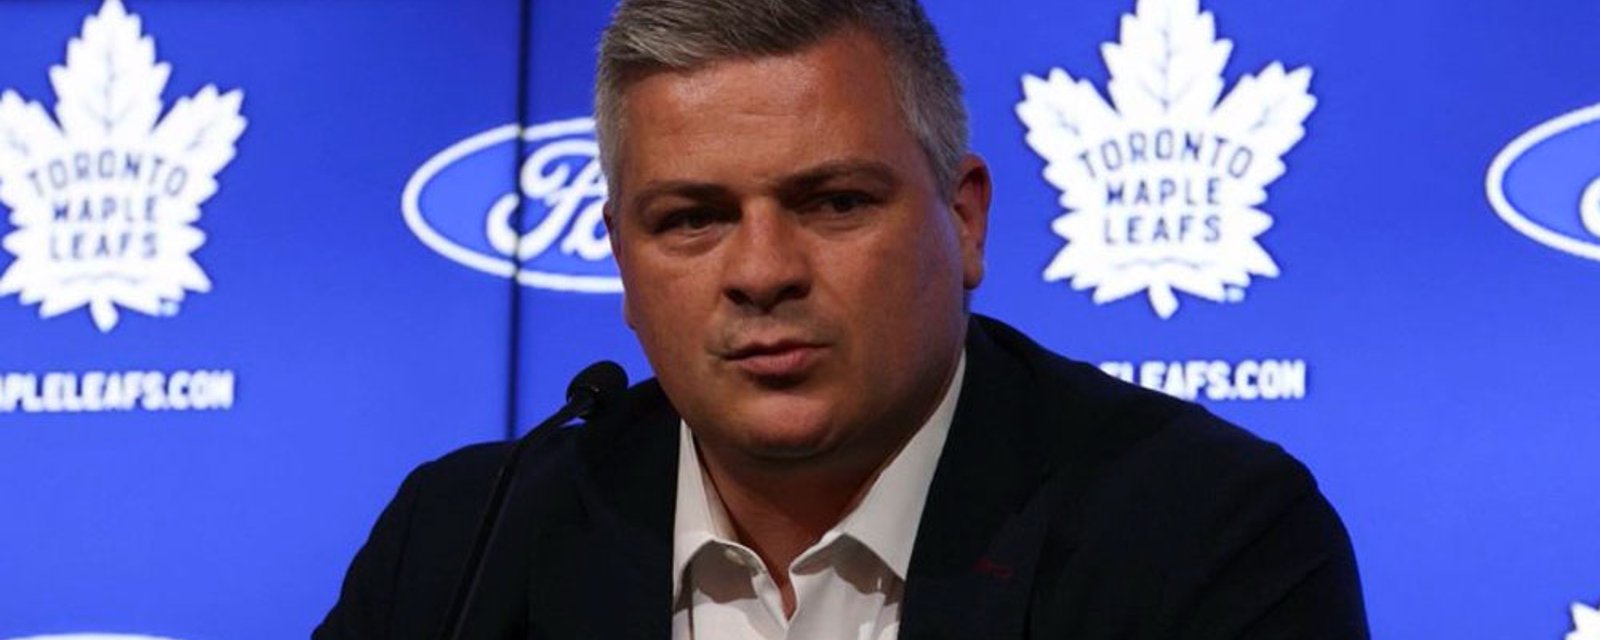 Confirmed: The Leafs are bringing back Sheldon Keefe